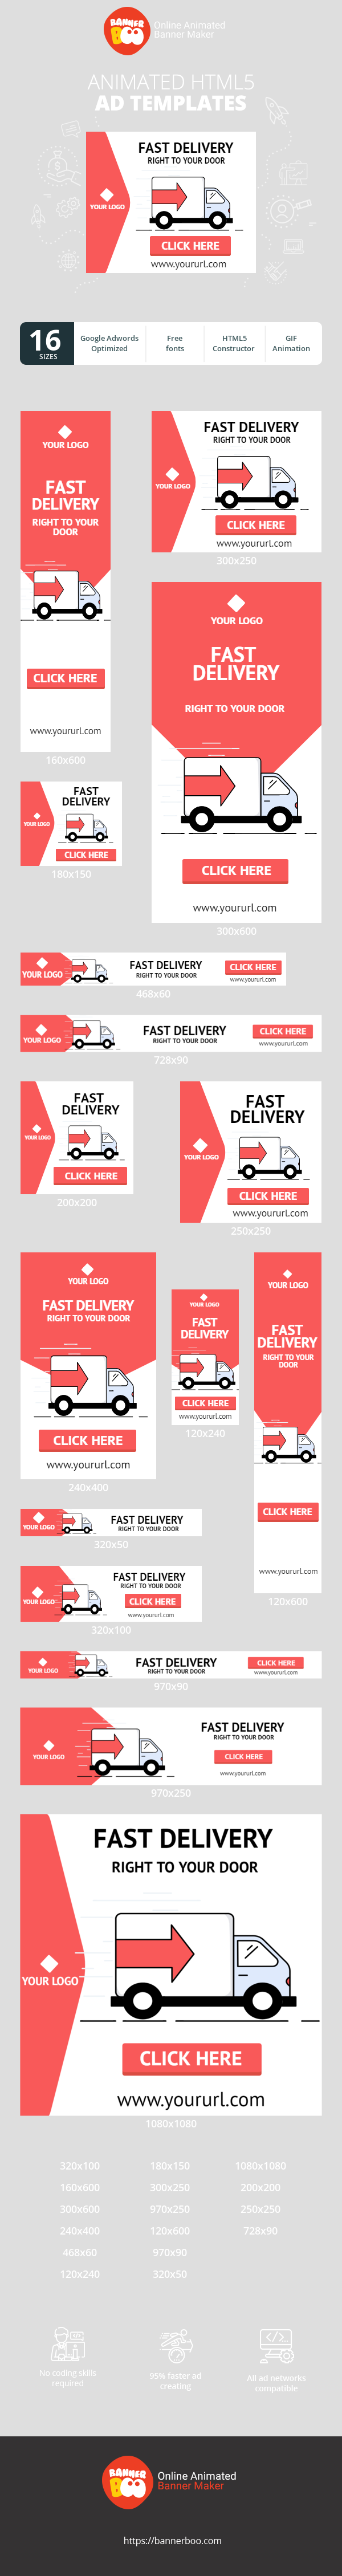 Szablon reklamy banerowej — Fast Delivery — Right to Your Door